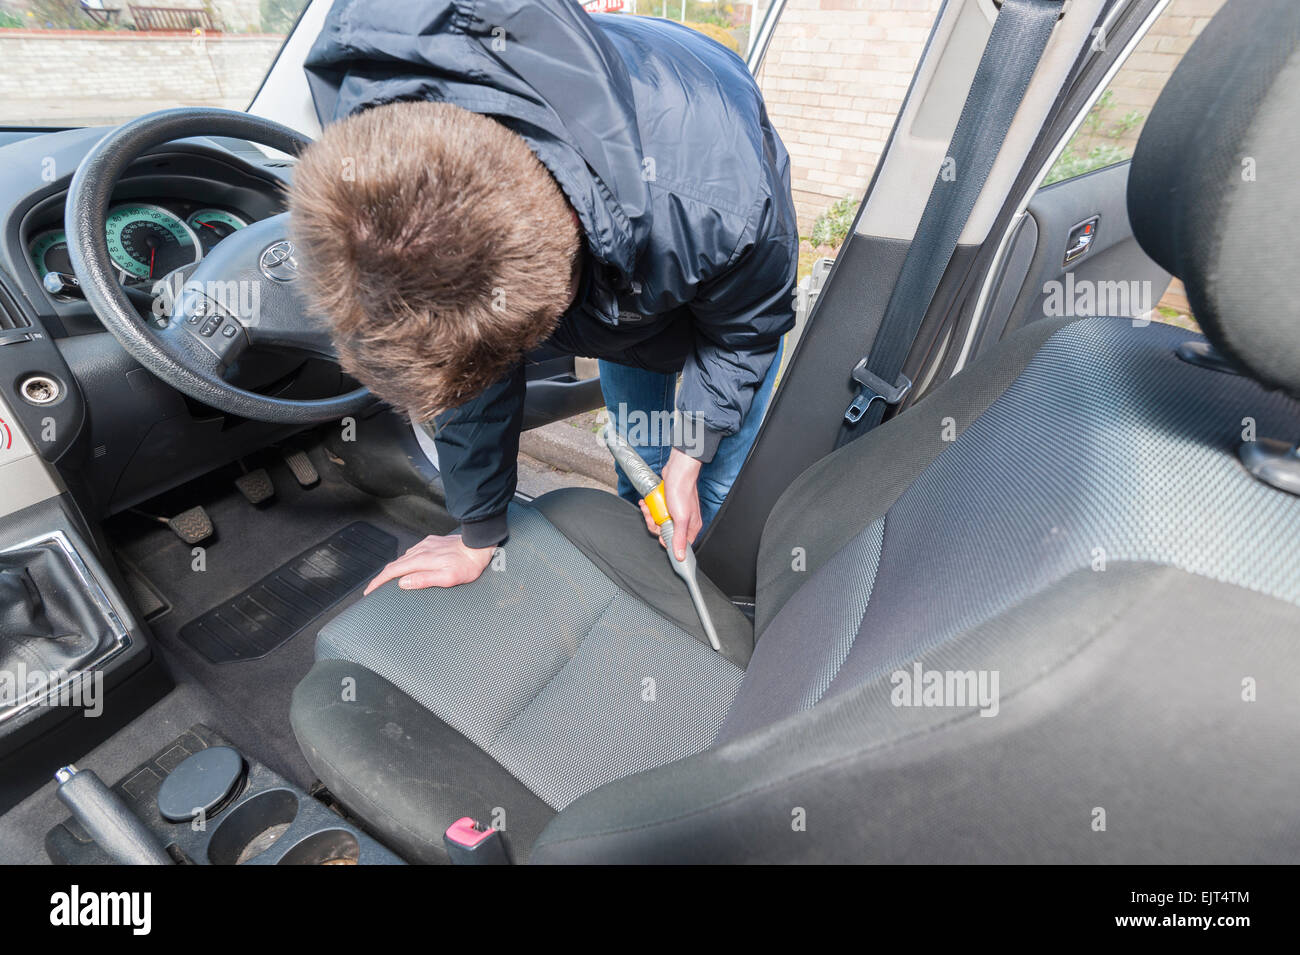 A 15 year old teenage boy cleaning the interior of a car to earn money Stock Photo